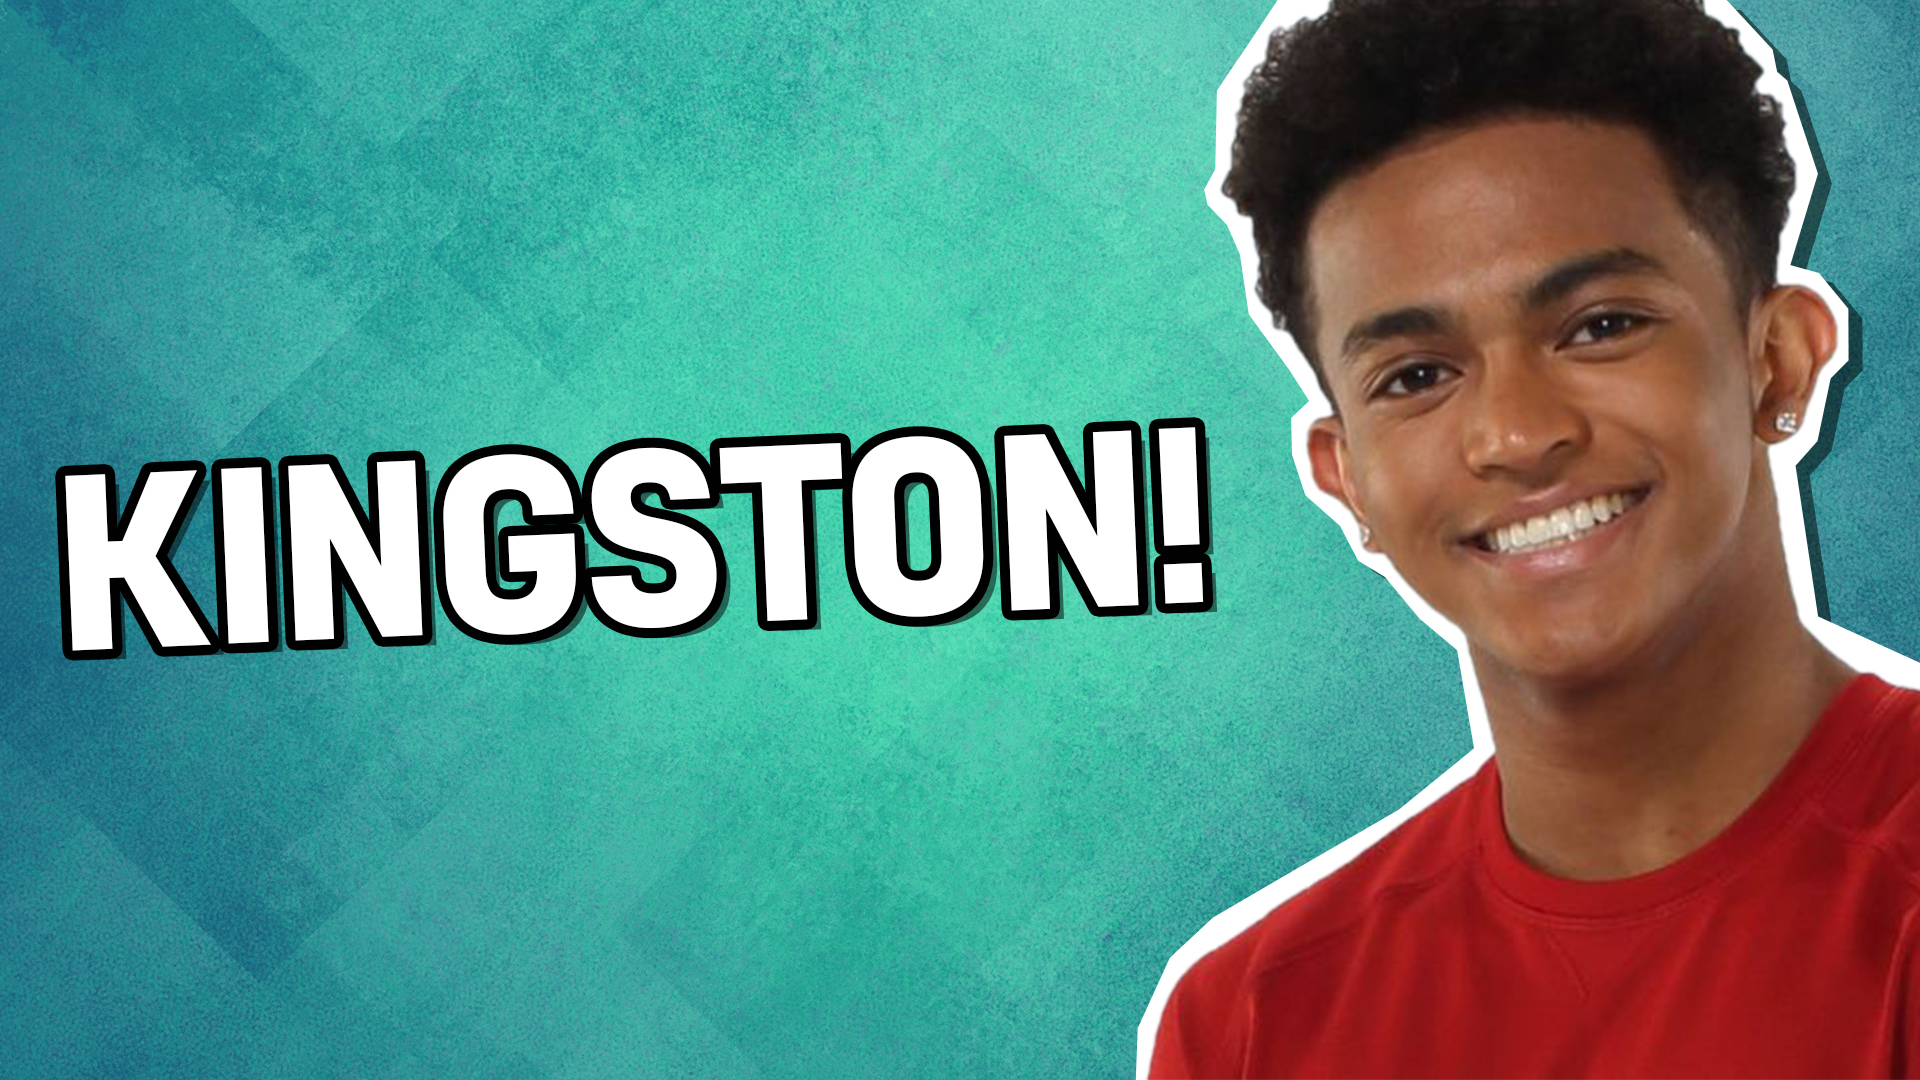 Kingston from The Next Step